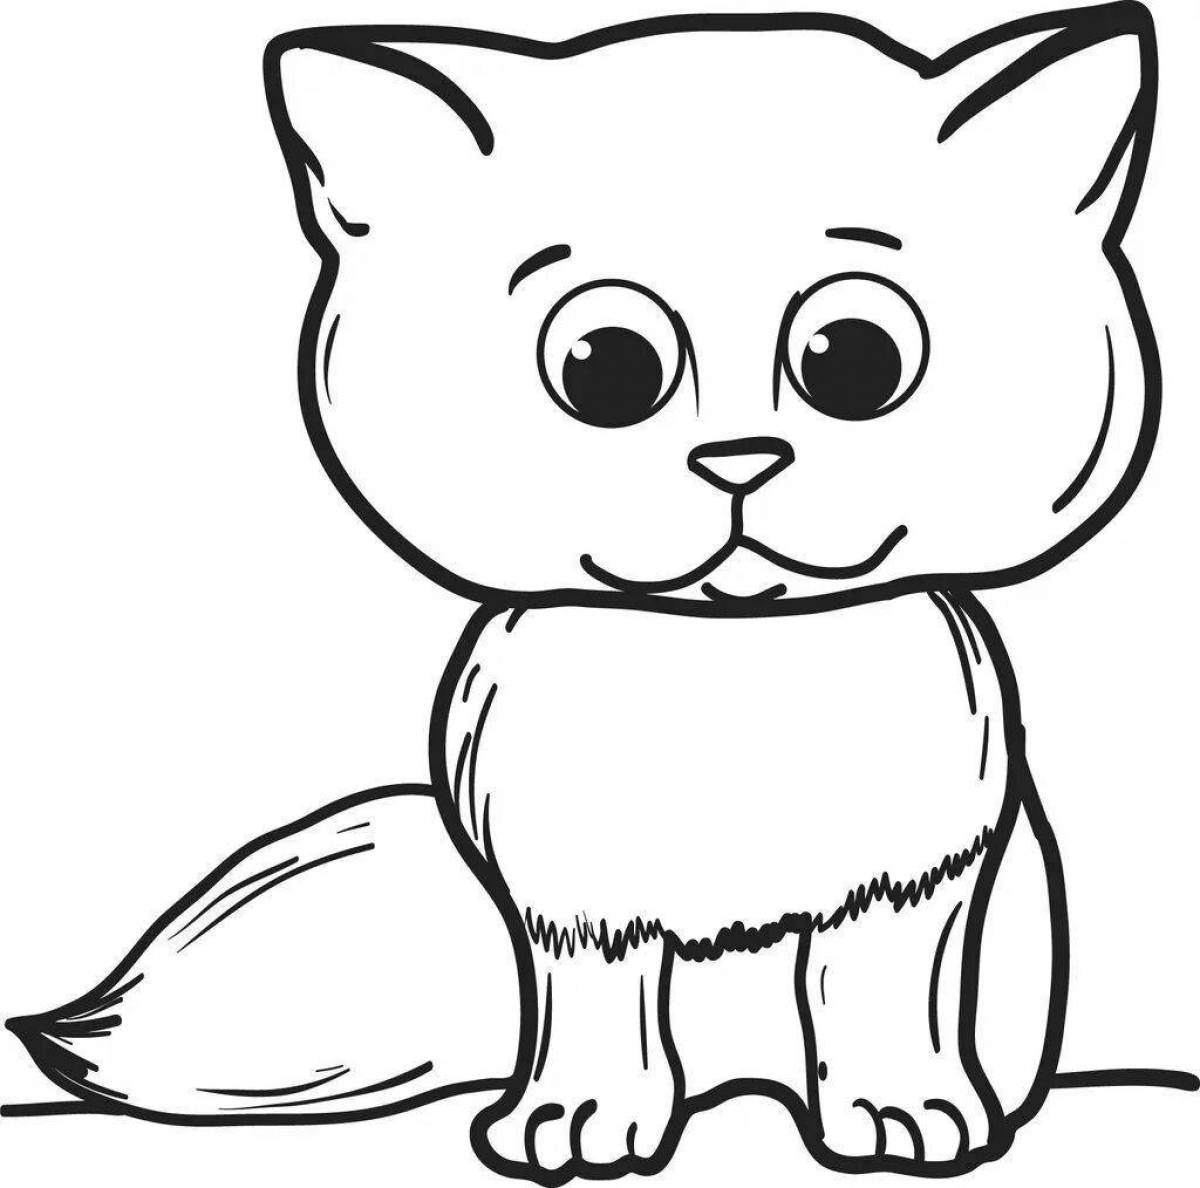 Cute black and white cat coloring book